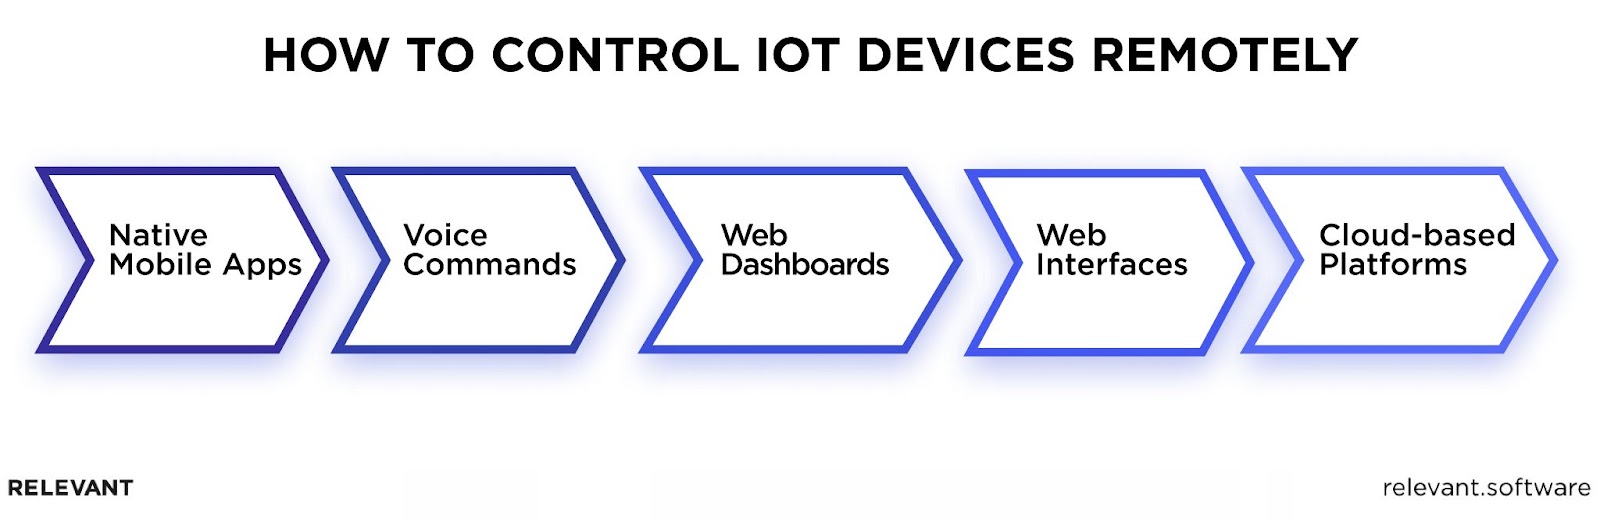 How to Control IoT Devices Remotely